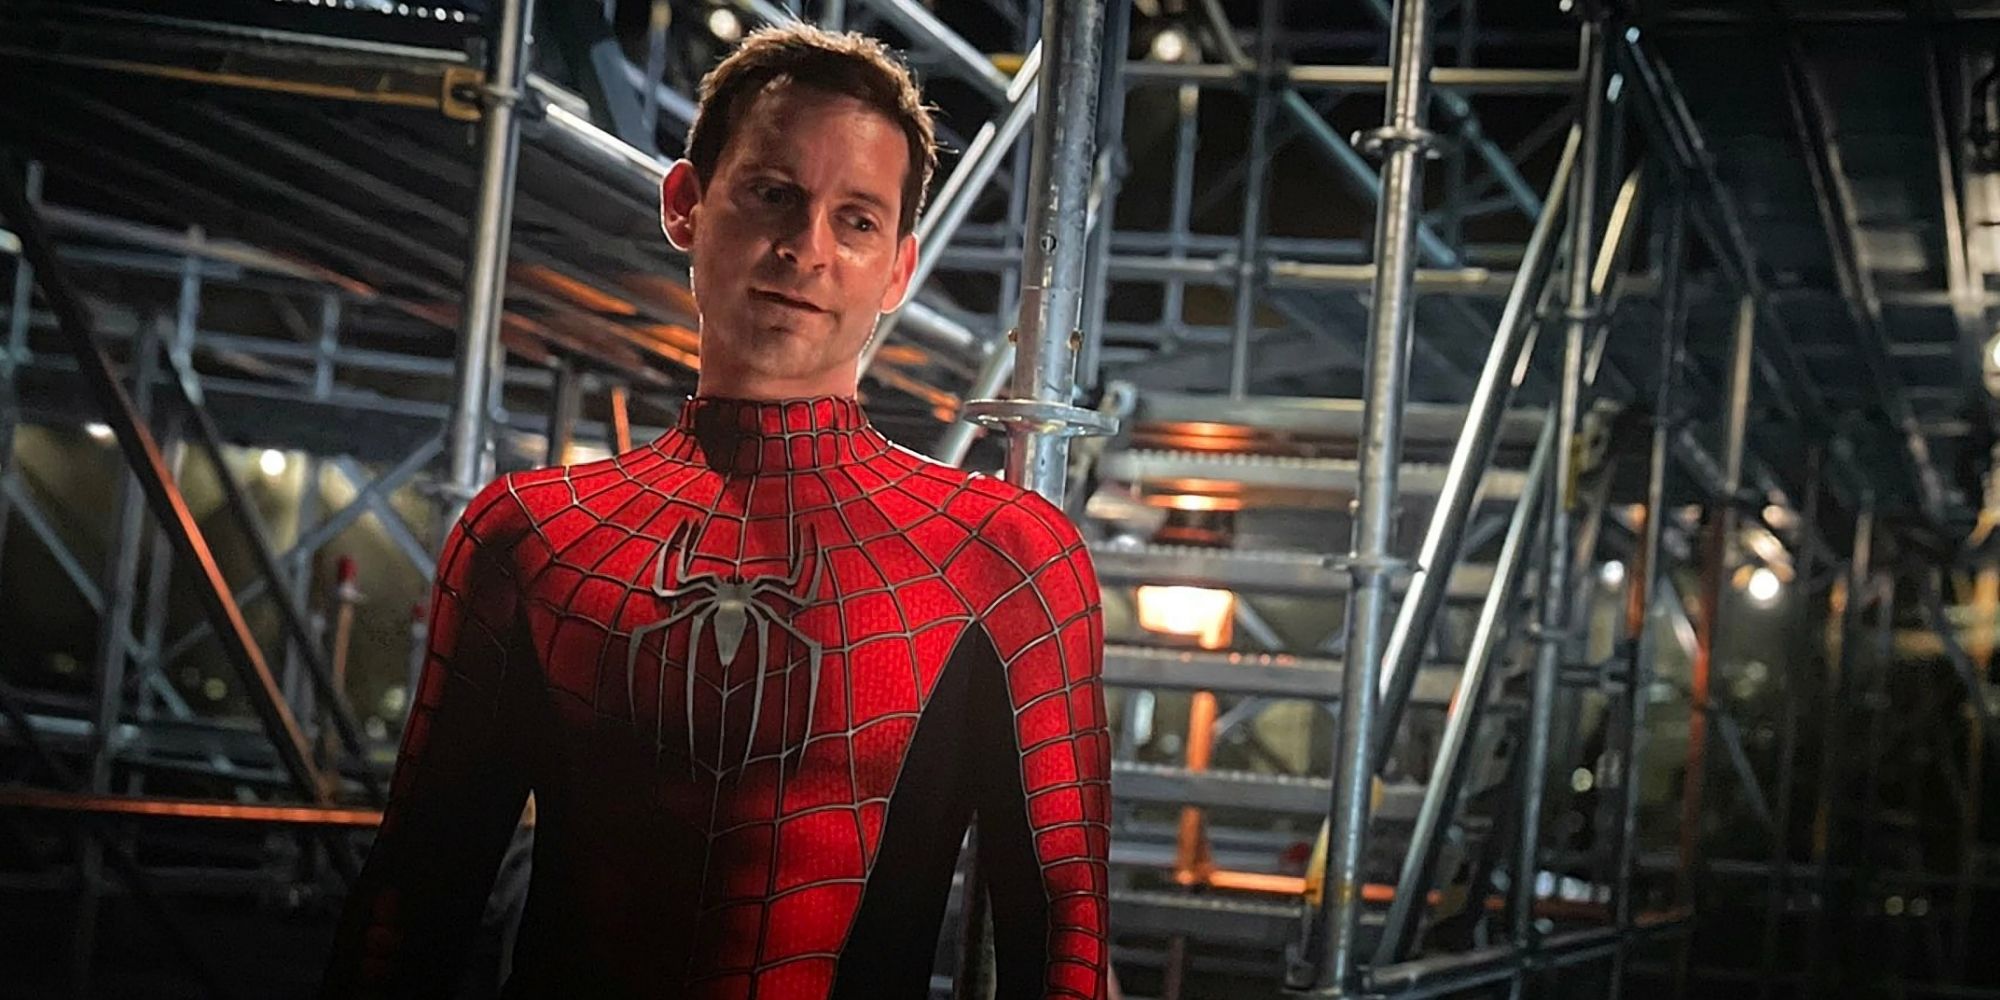 Tobey Maguire plays an older Peter Parker in 'Spider-Man: No Way Home' (2021)